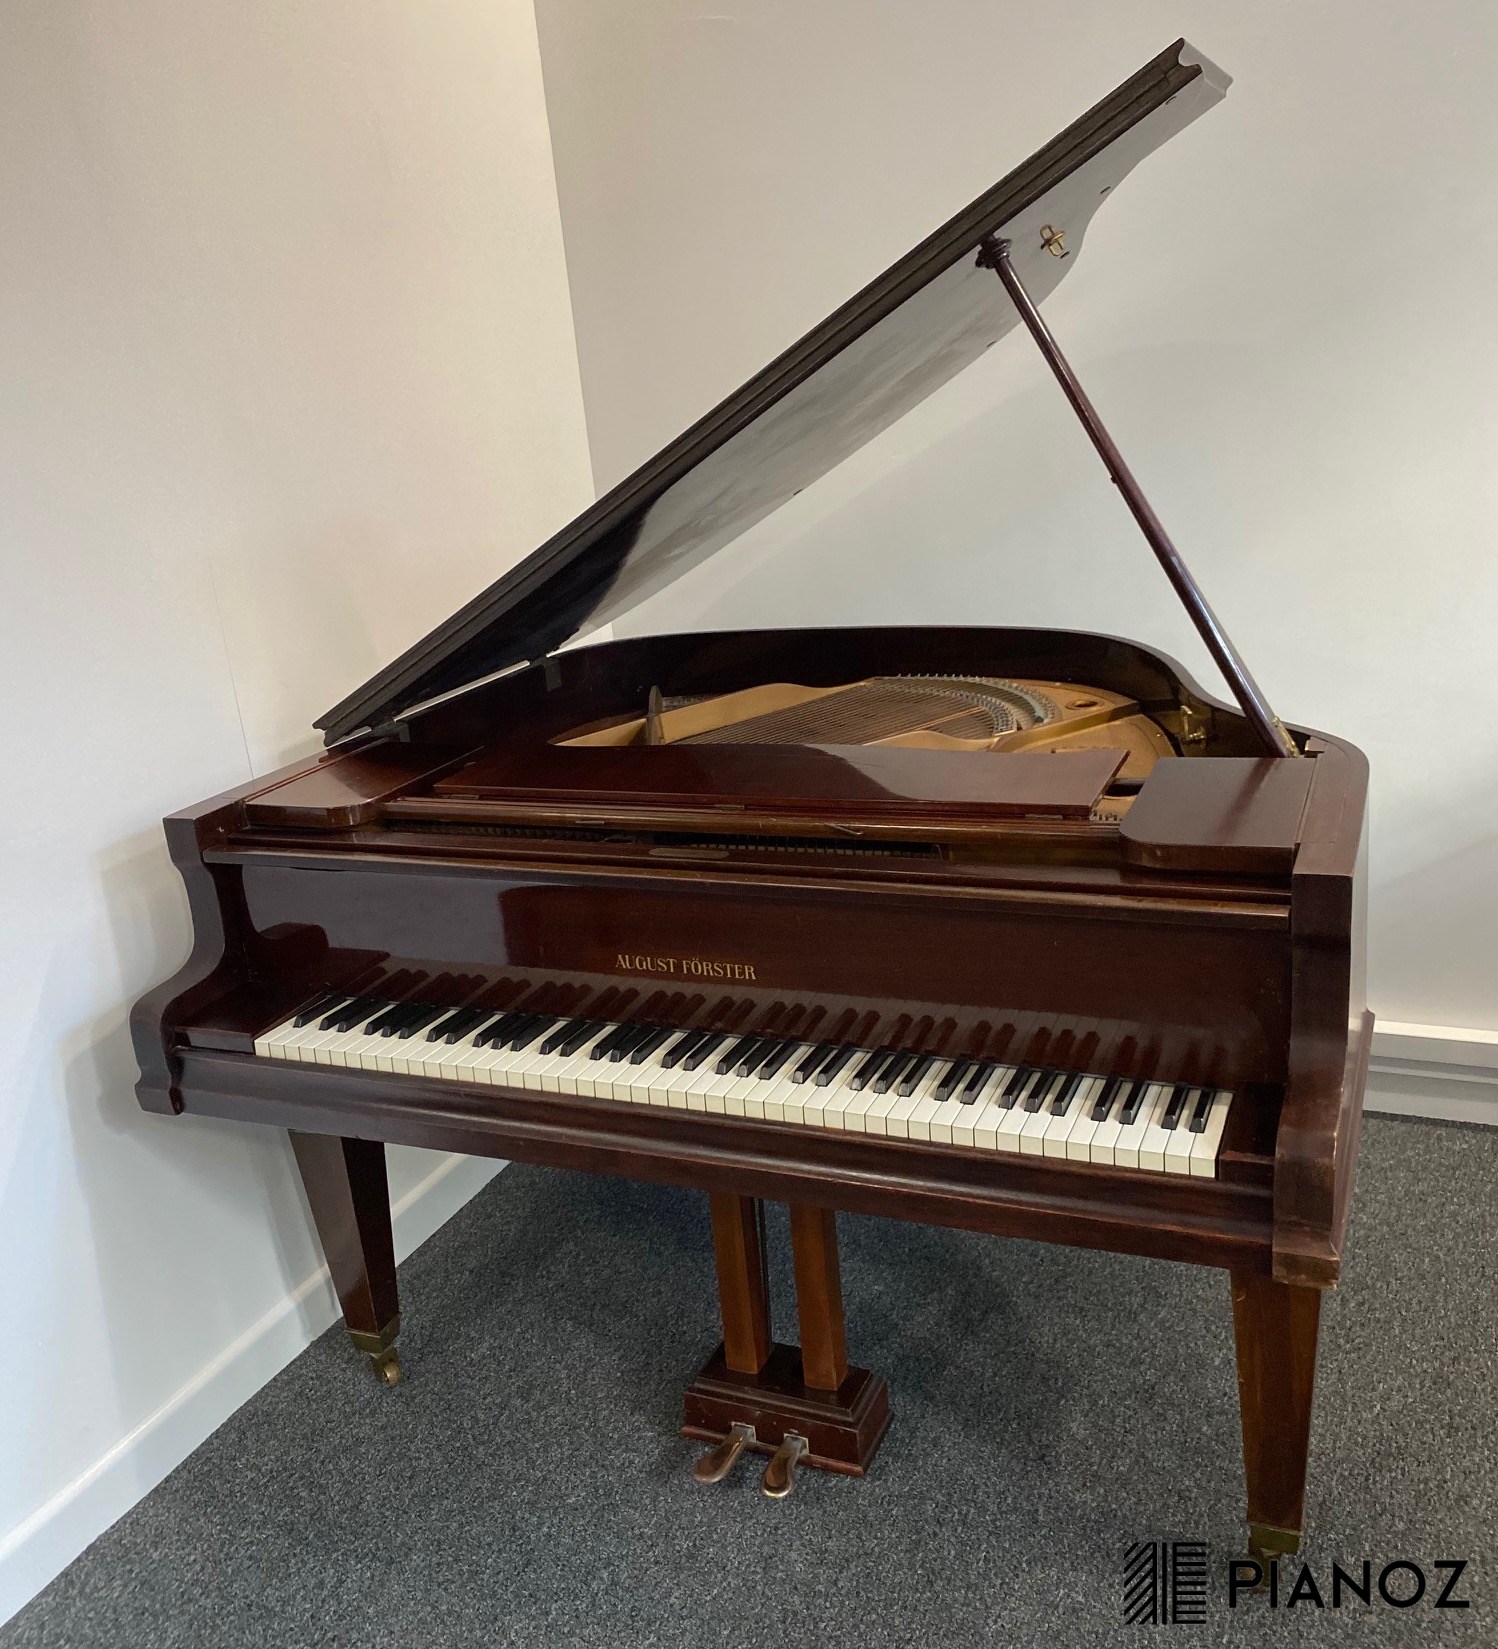 August Förster Refurbished Baby Grand Piano piano for sale in UK